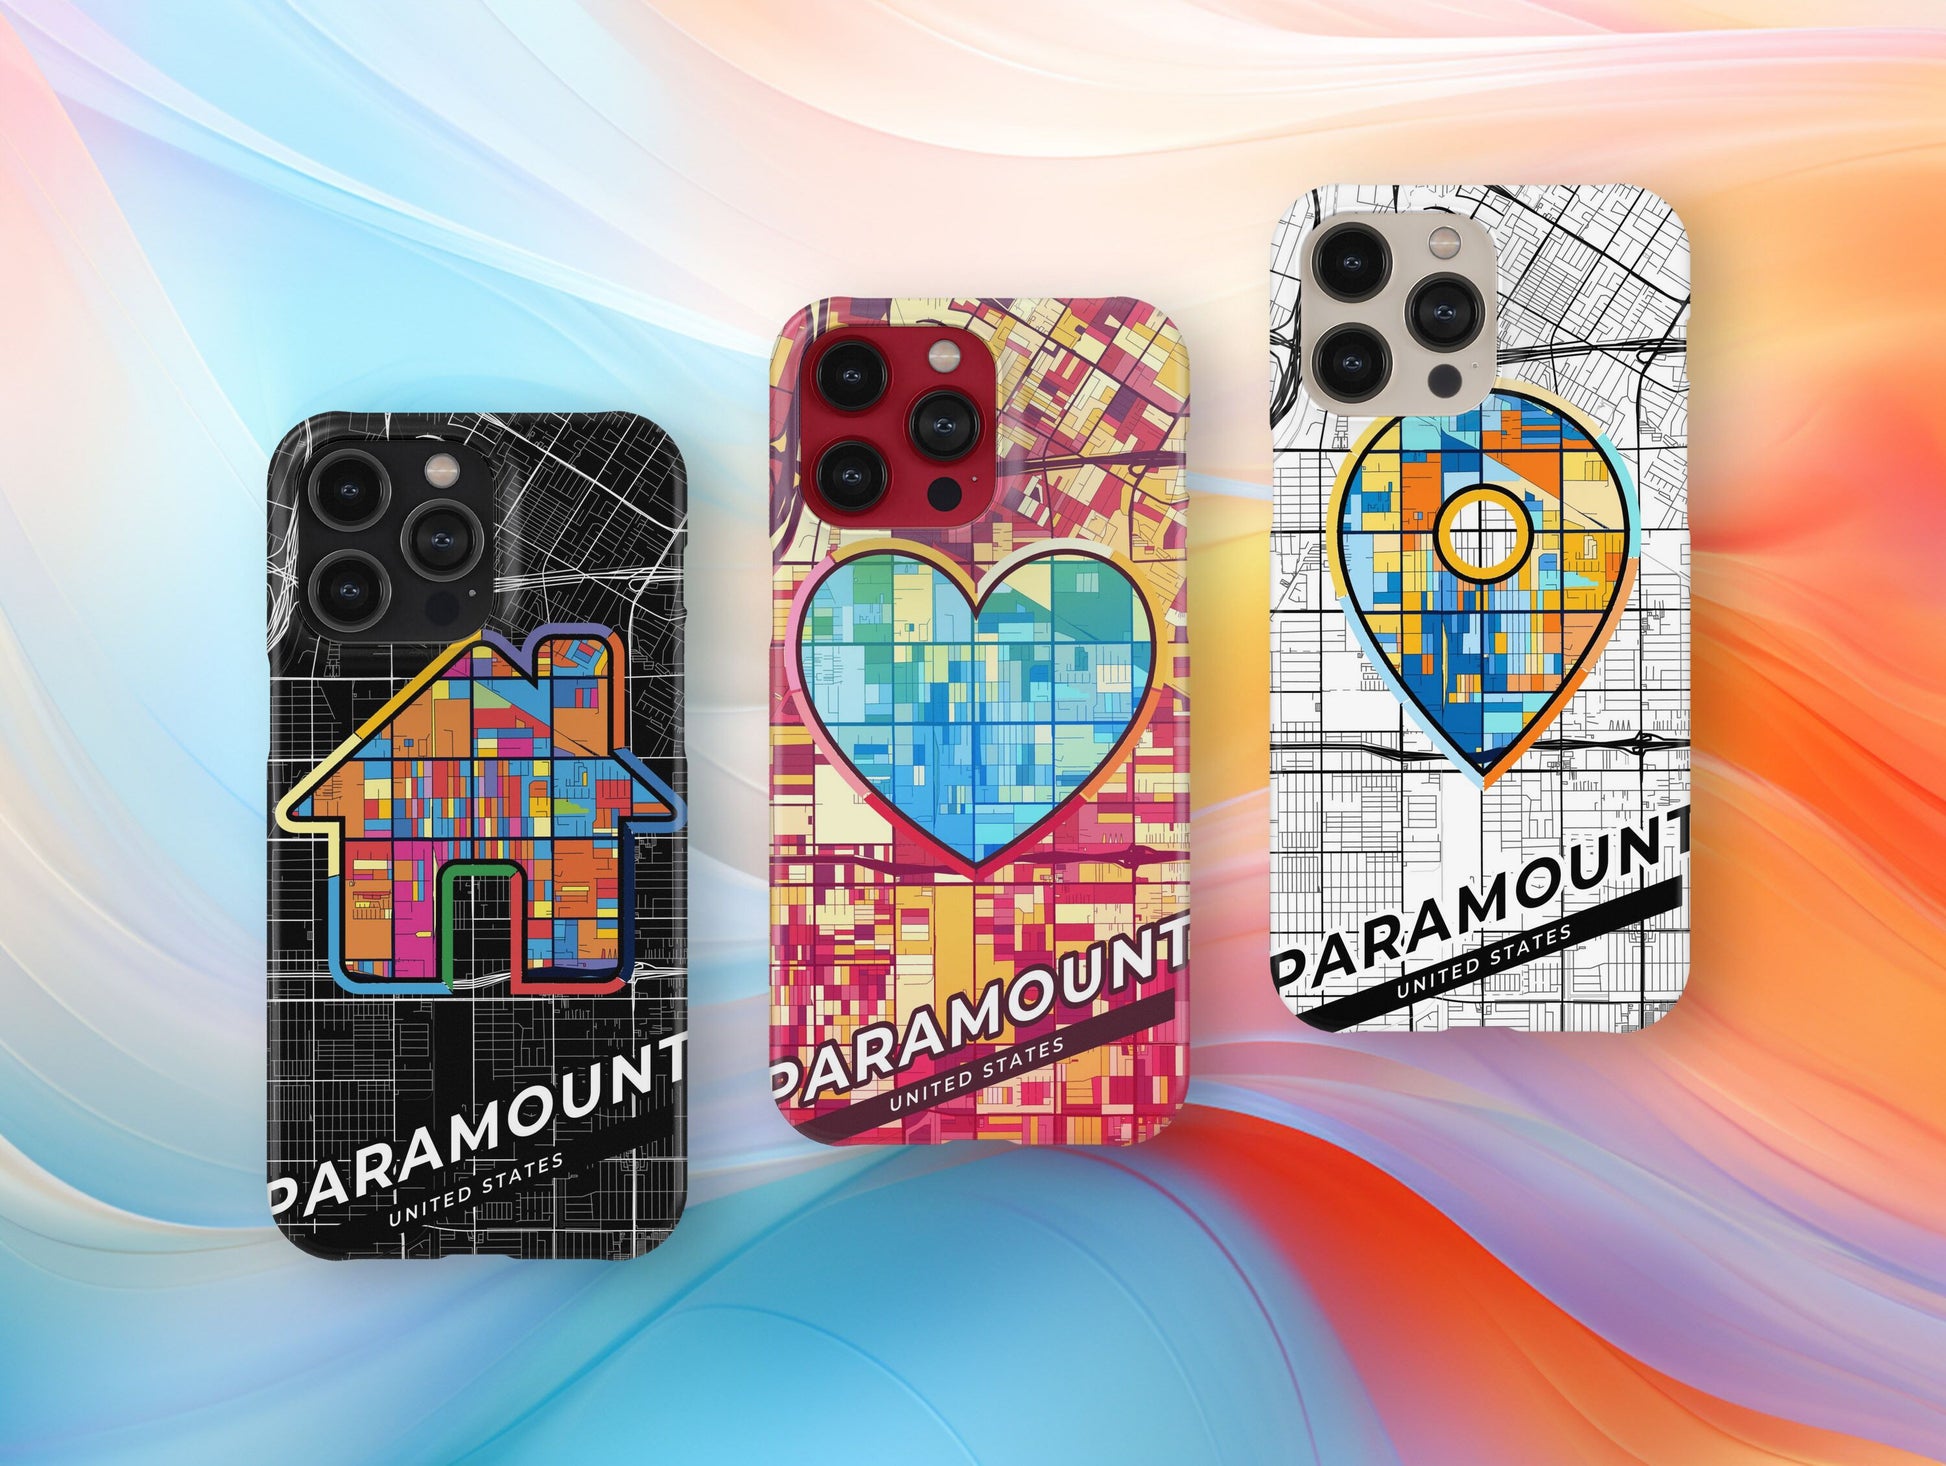 Paramount California slim phone case with colorful icon